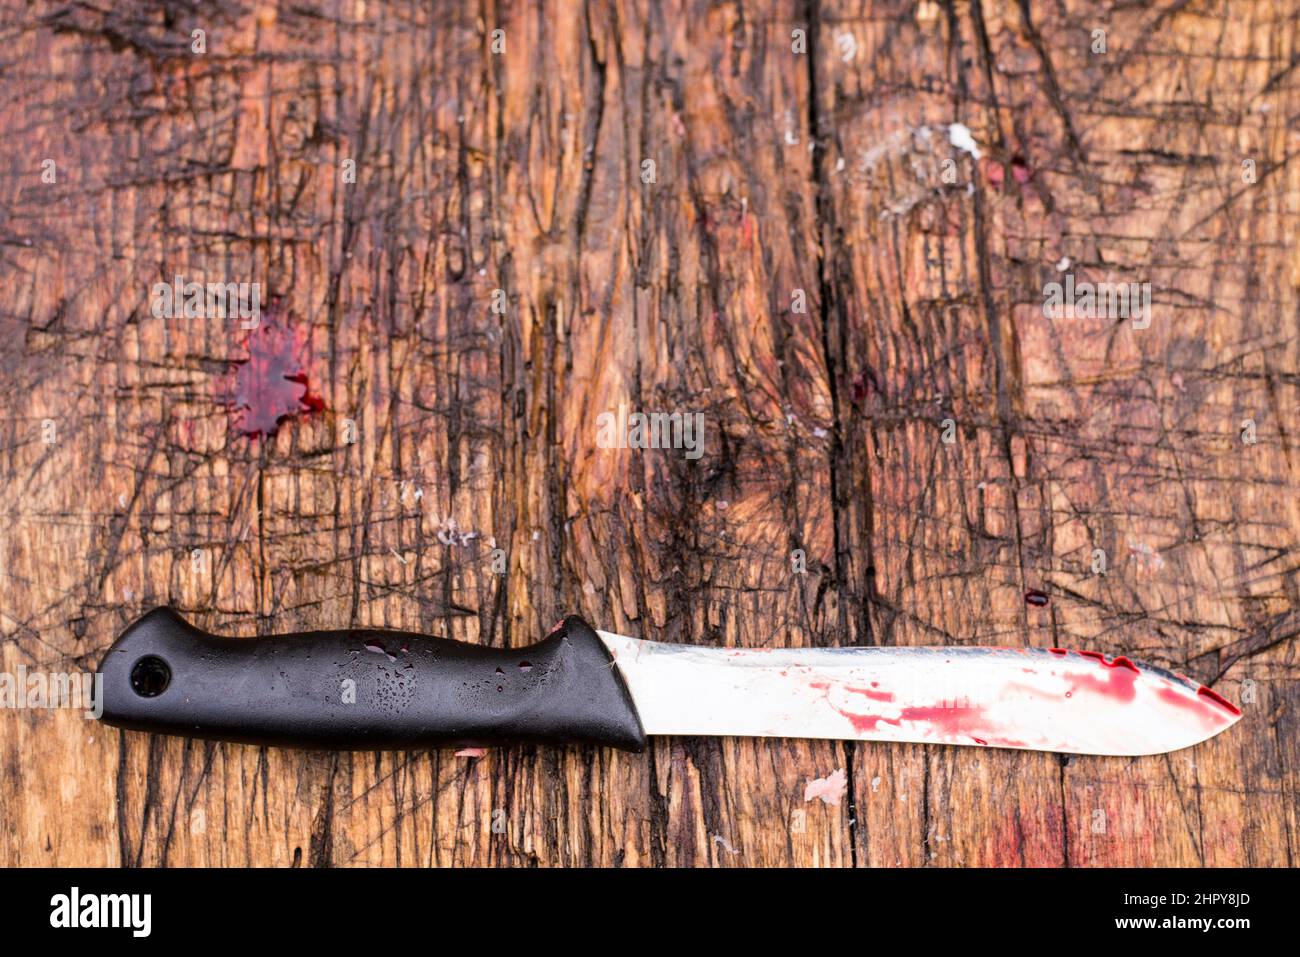 Bloody slaughter knife on a hard wooden cut chopping board. Home slaughter. Stock Photo